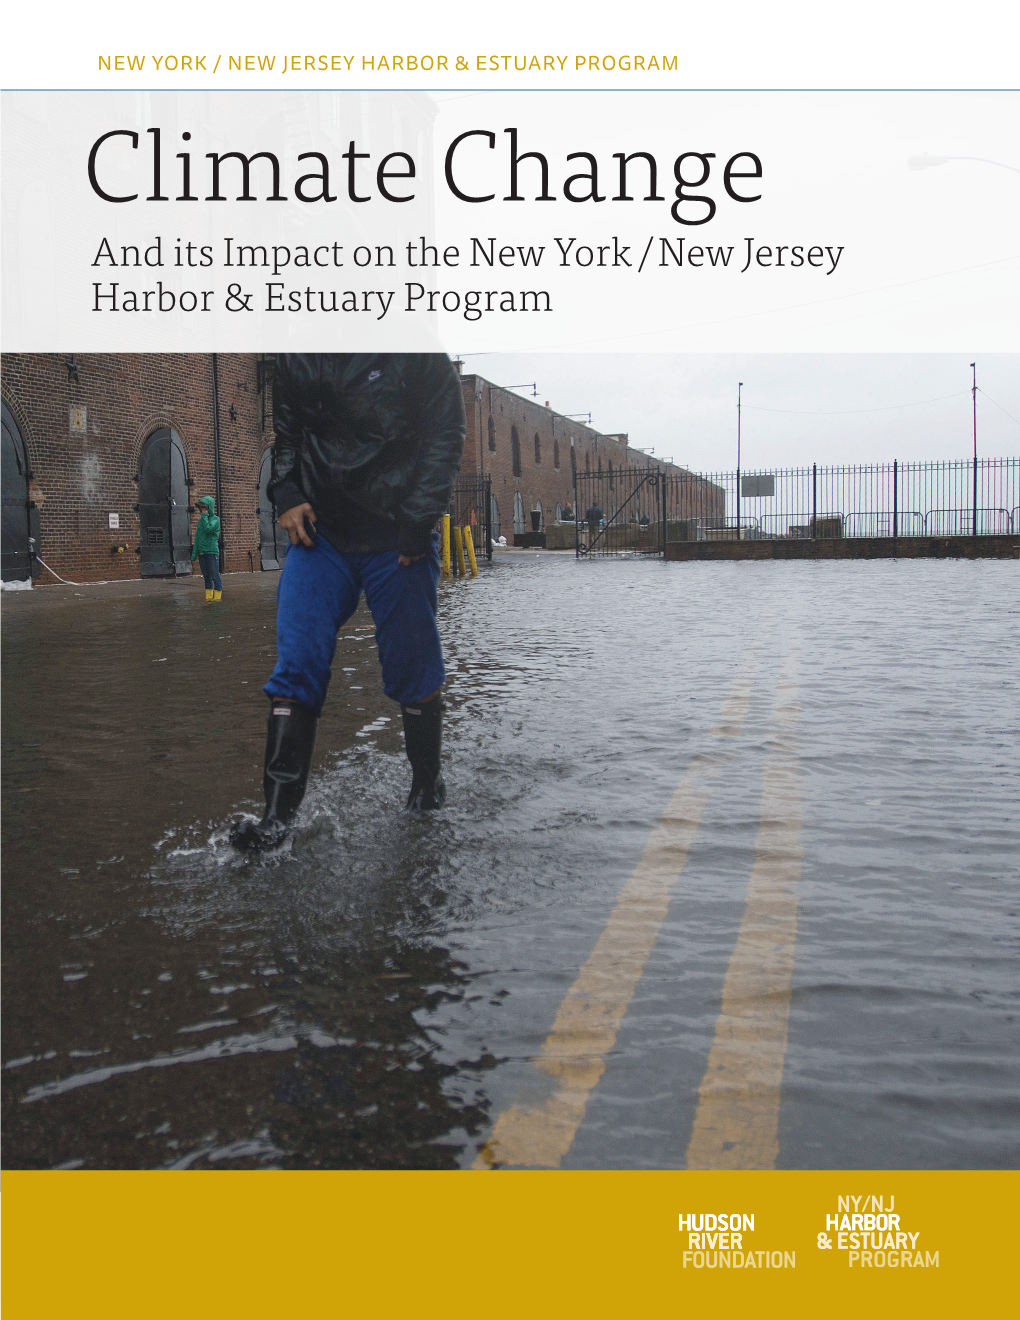 Climate Change and Its Impact on the New York/ New Jersey Harbor & Estuary Program